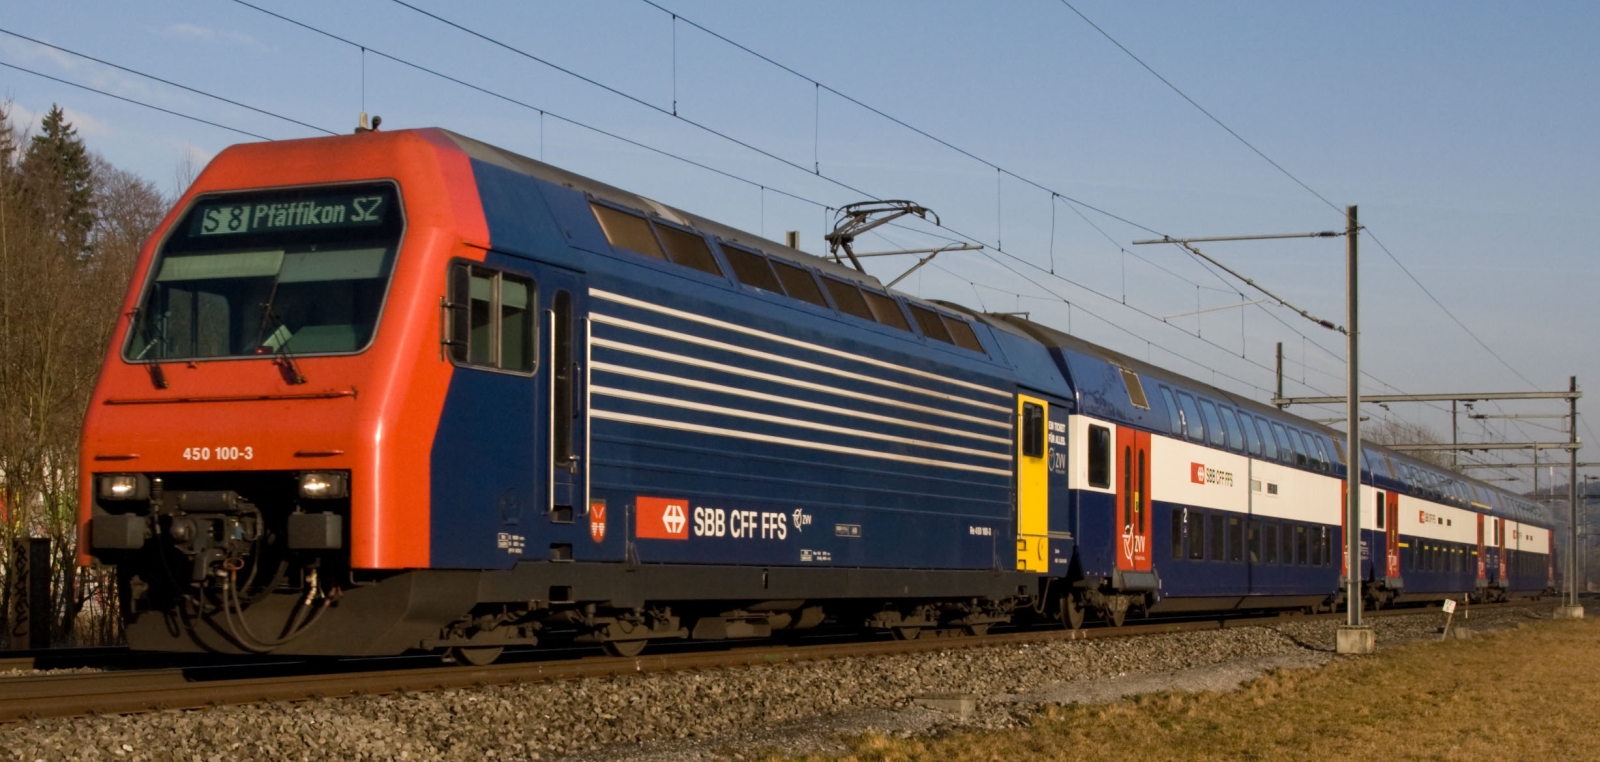 Re 450 100 with a double-deck push-pull train in February 2008 between Winterthur and Zurich